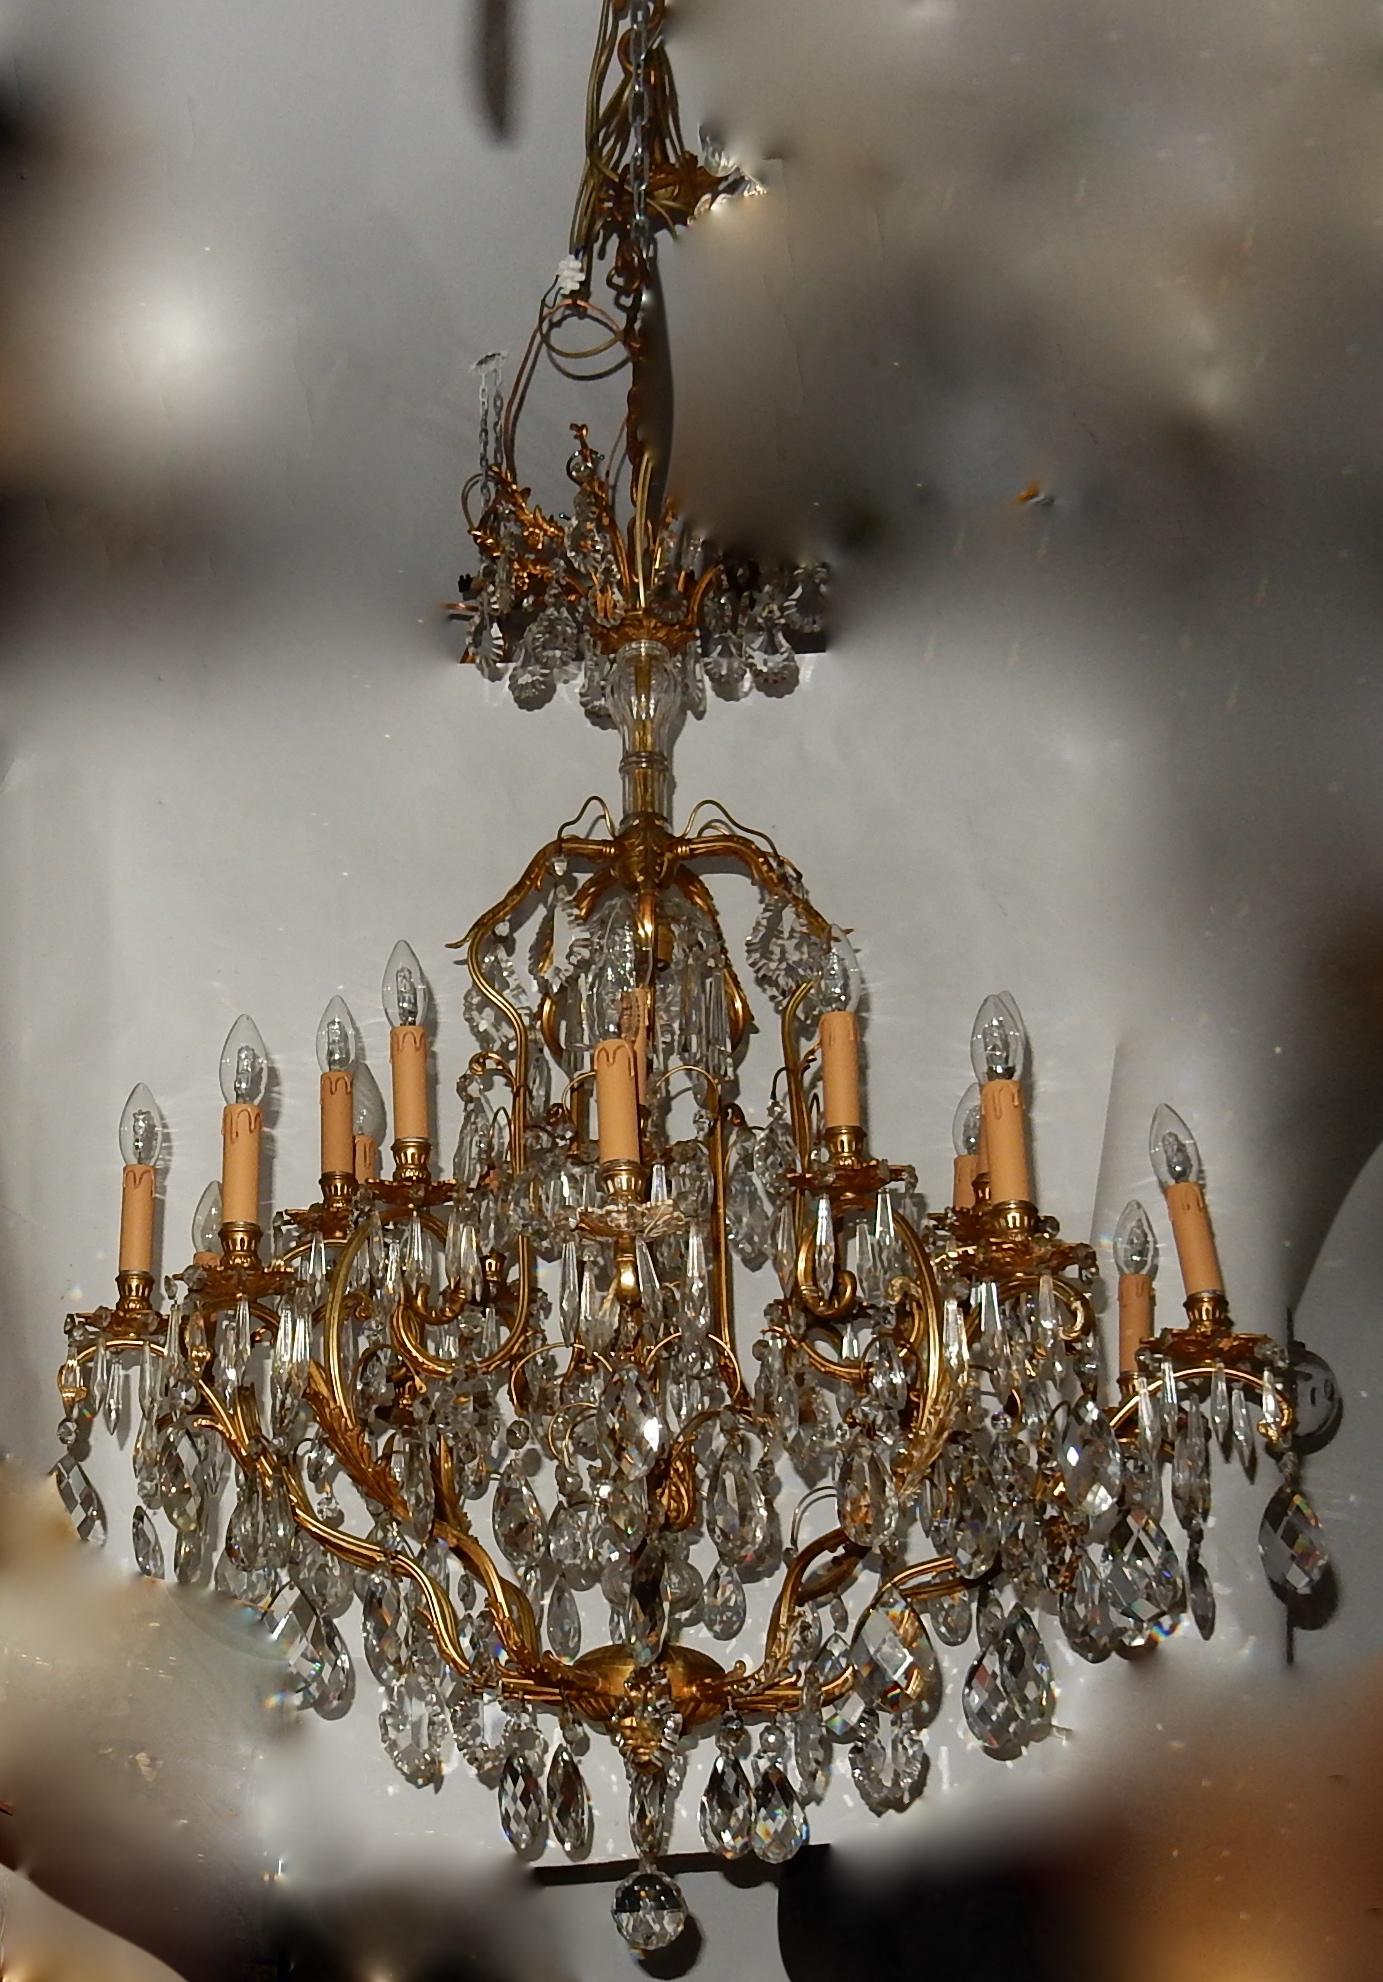 Chandelier with 10 arms and 21 bulbs and crystals
Measures: Height 130 cm without chain
Good condition,
circa 1880-1900
Electric system rewire for Europe.